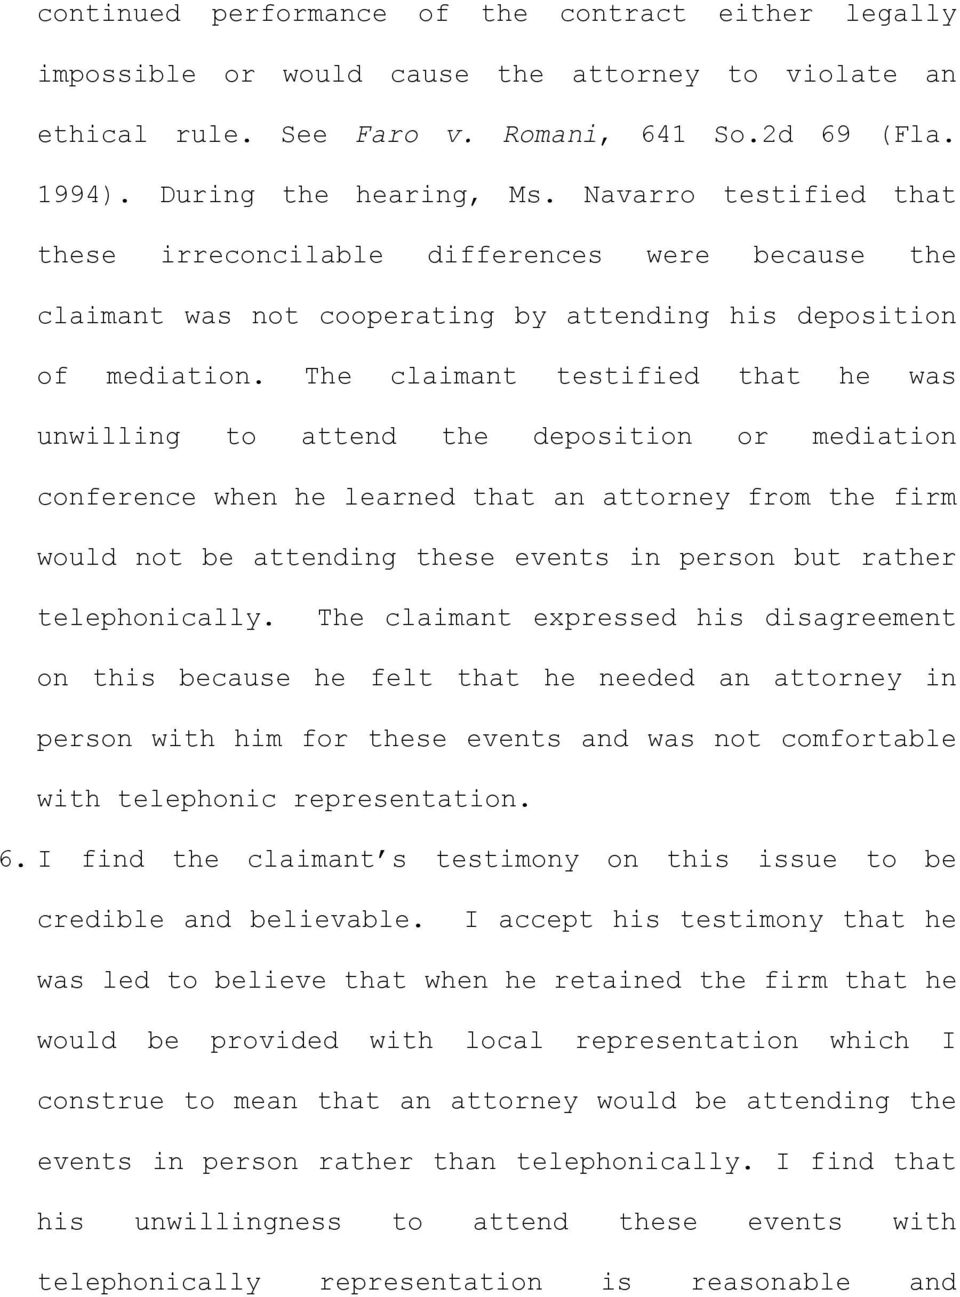 The claimant testified that he was unwilling to attend the deposition or mediation conference when he learned that an attorney from the firm would not be attending these events in person but rather